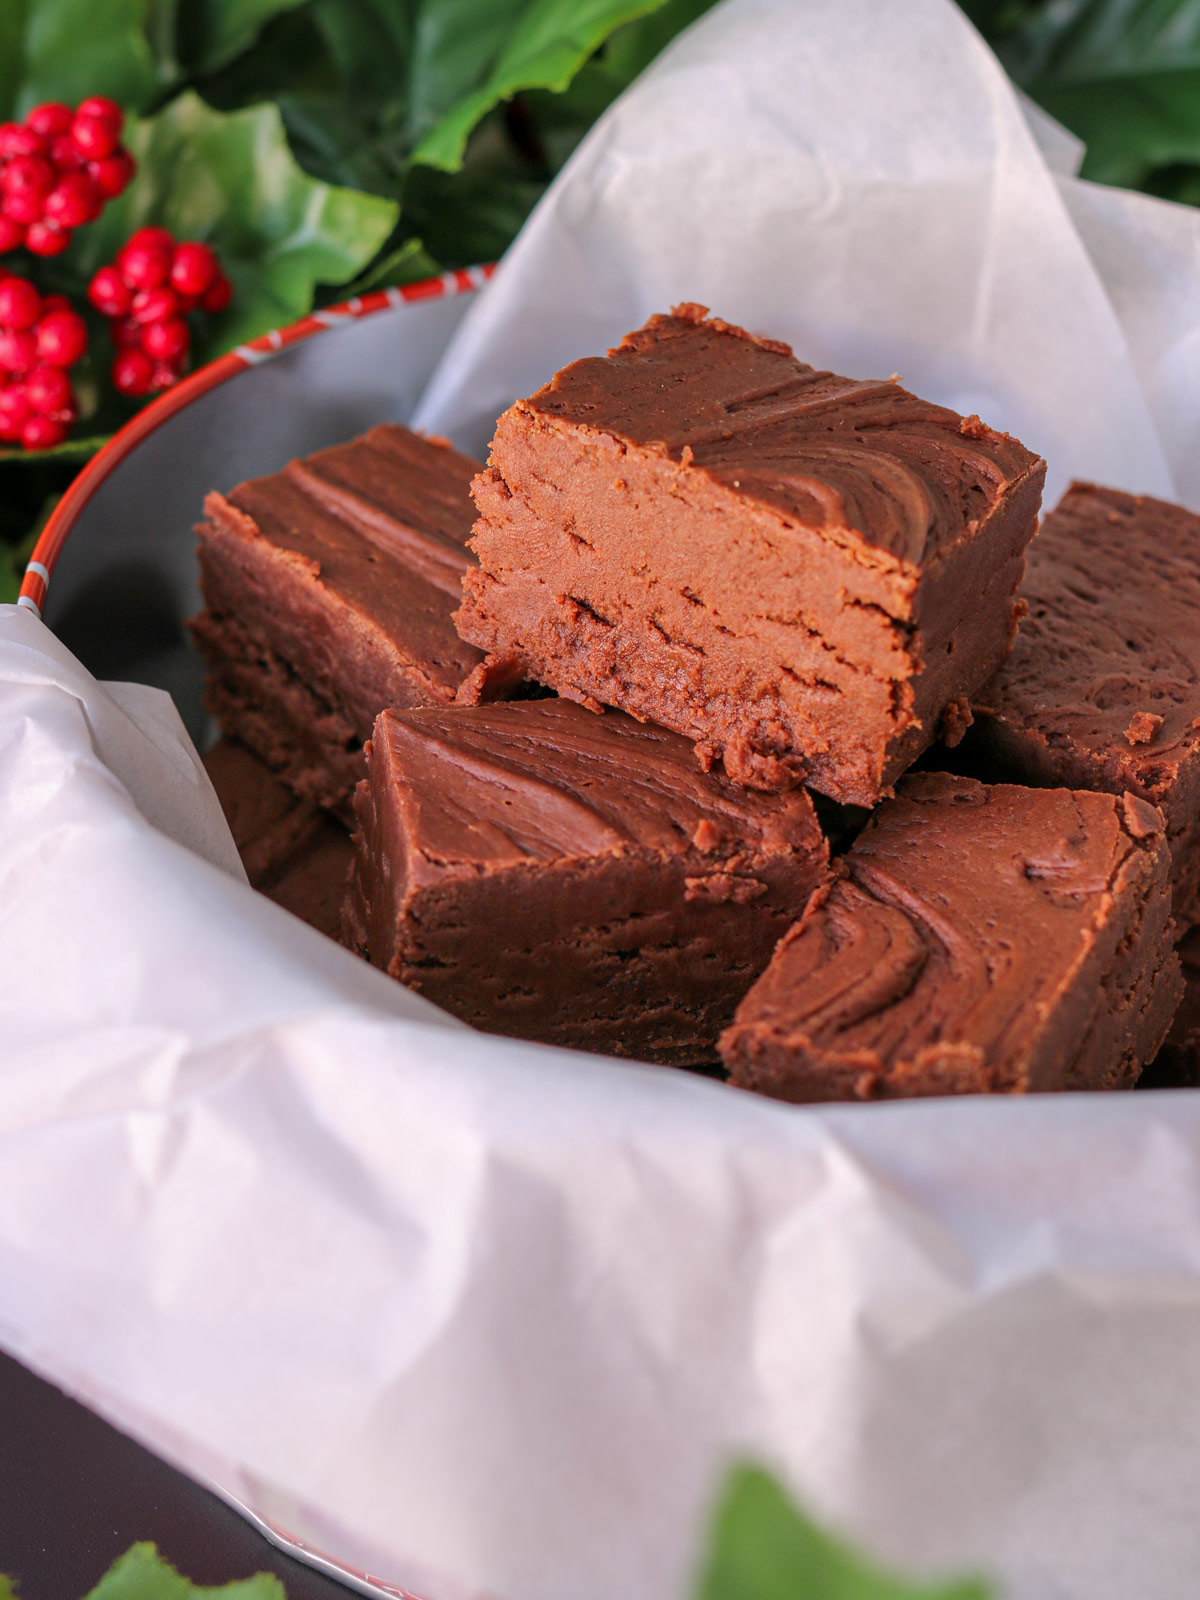 fudge piled into a tin with parchment paper, holly behind.